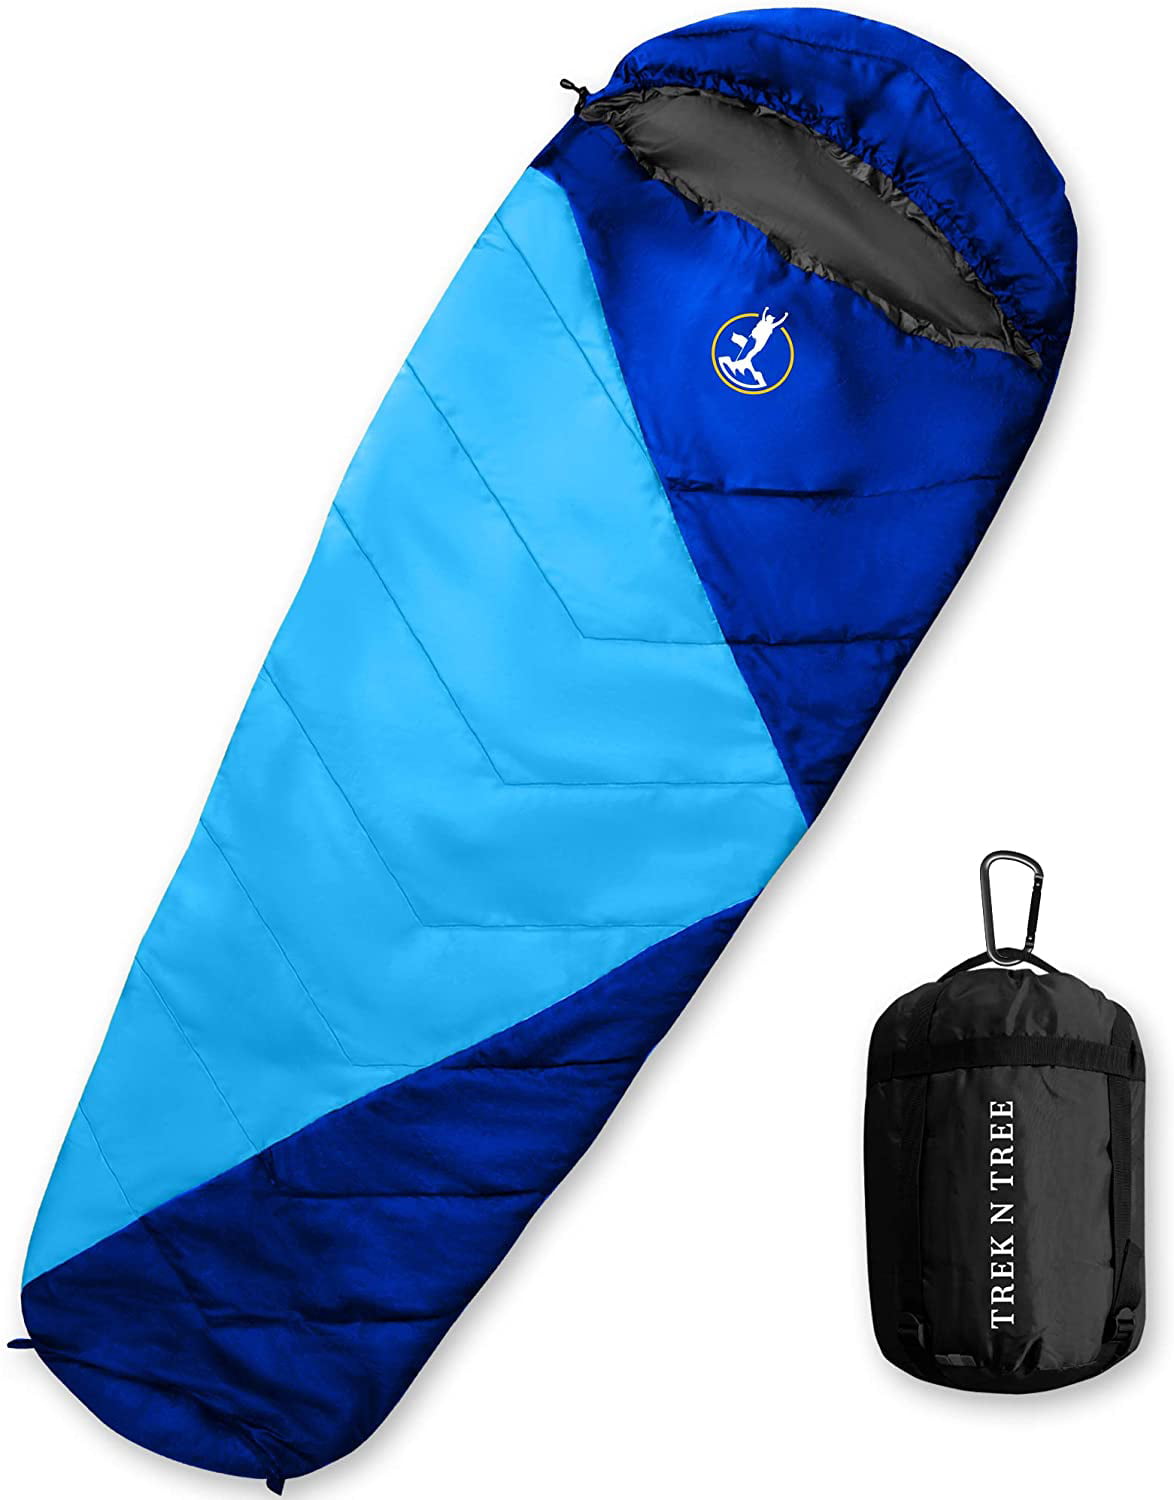 Duraton Mummy Sleeping Bag 20 Degree Weather Lightweight with Compression Sack for Camping or Backpacking Warm for Both Adults and Kids